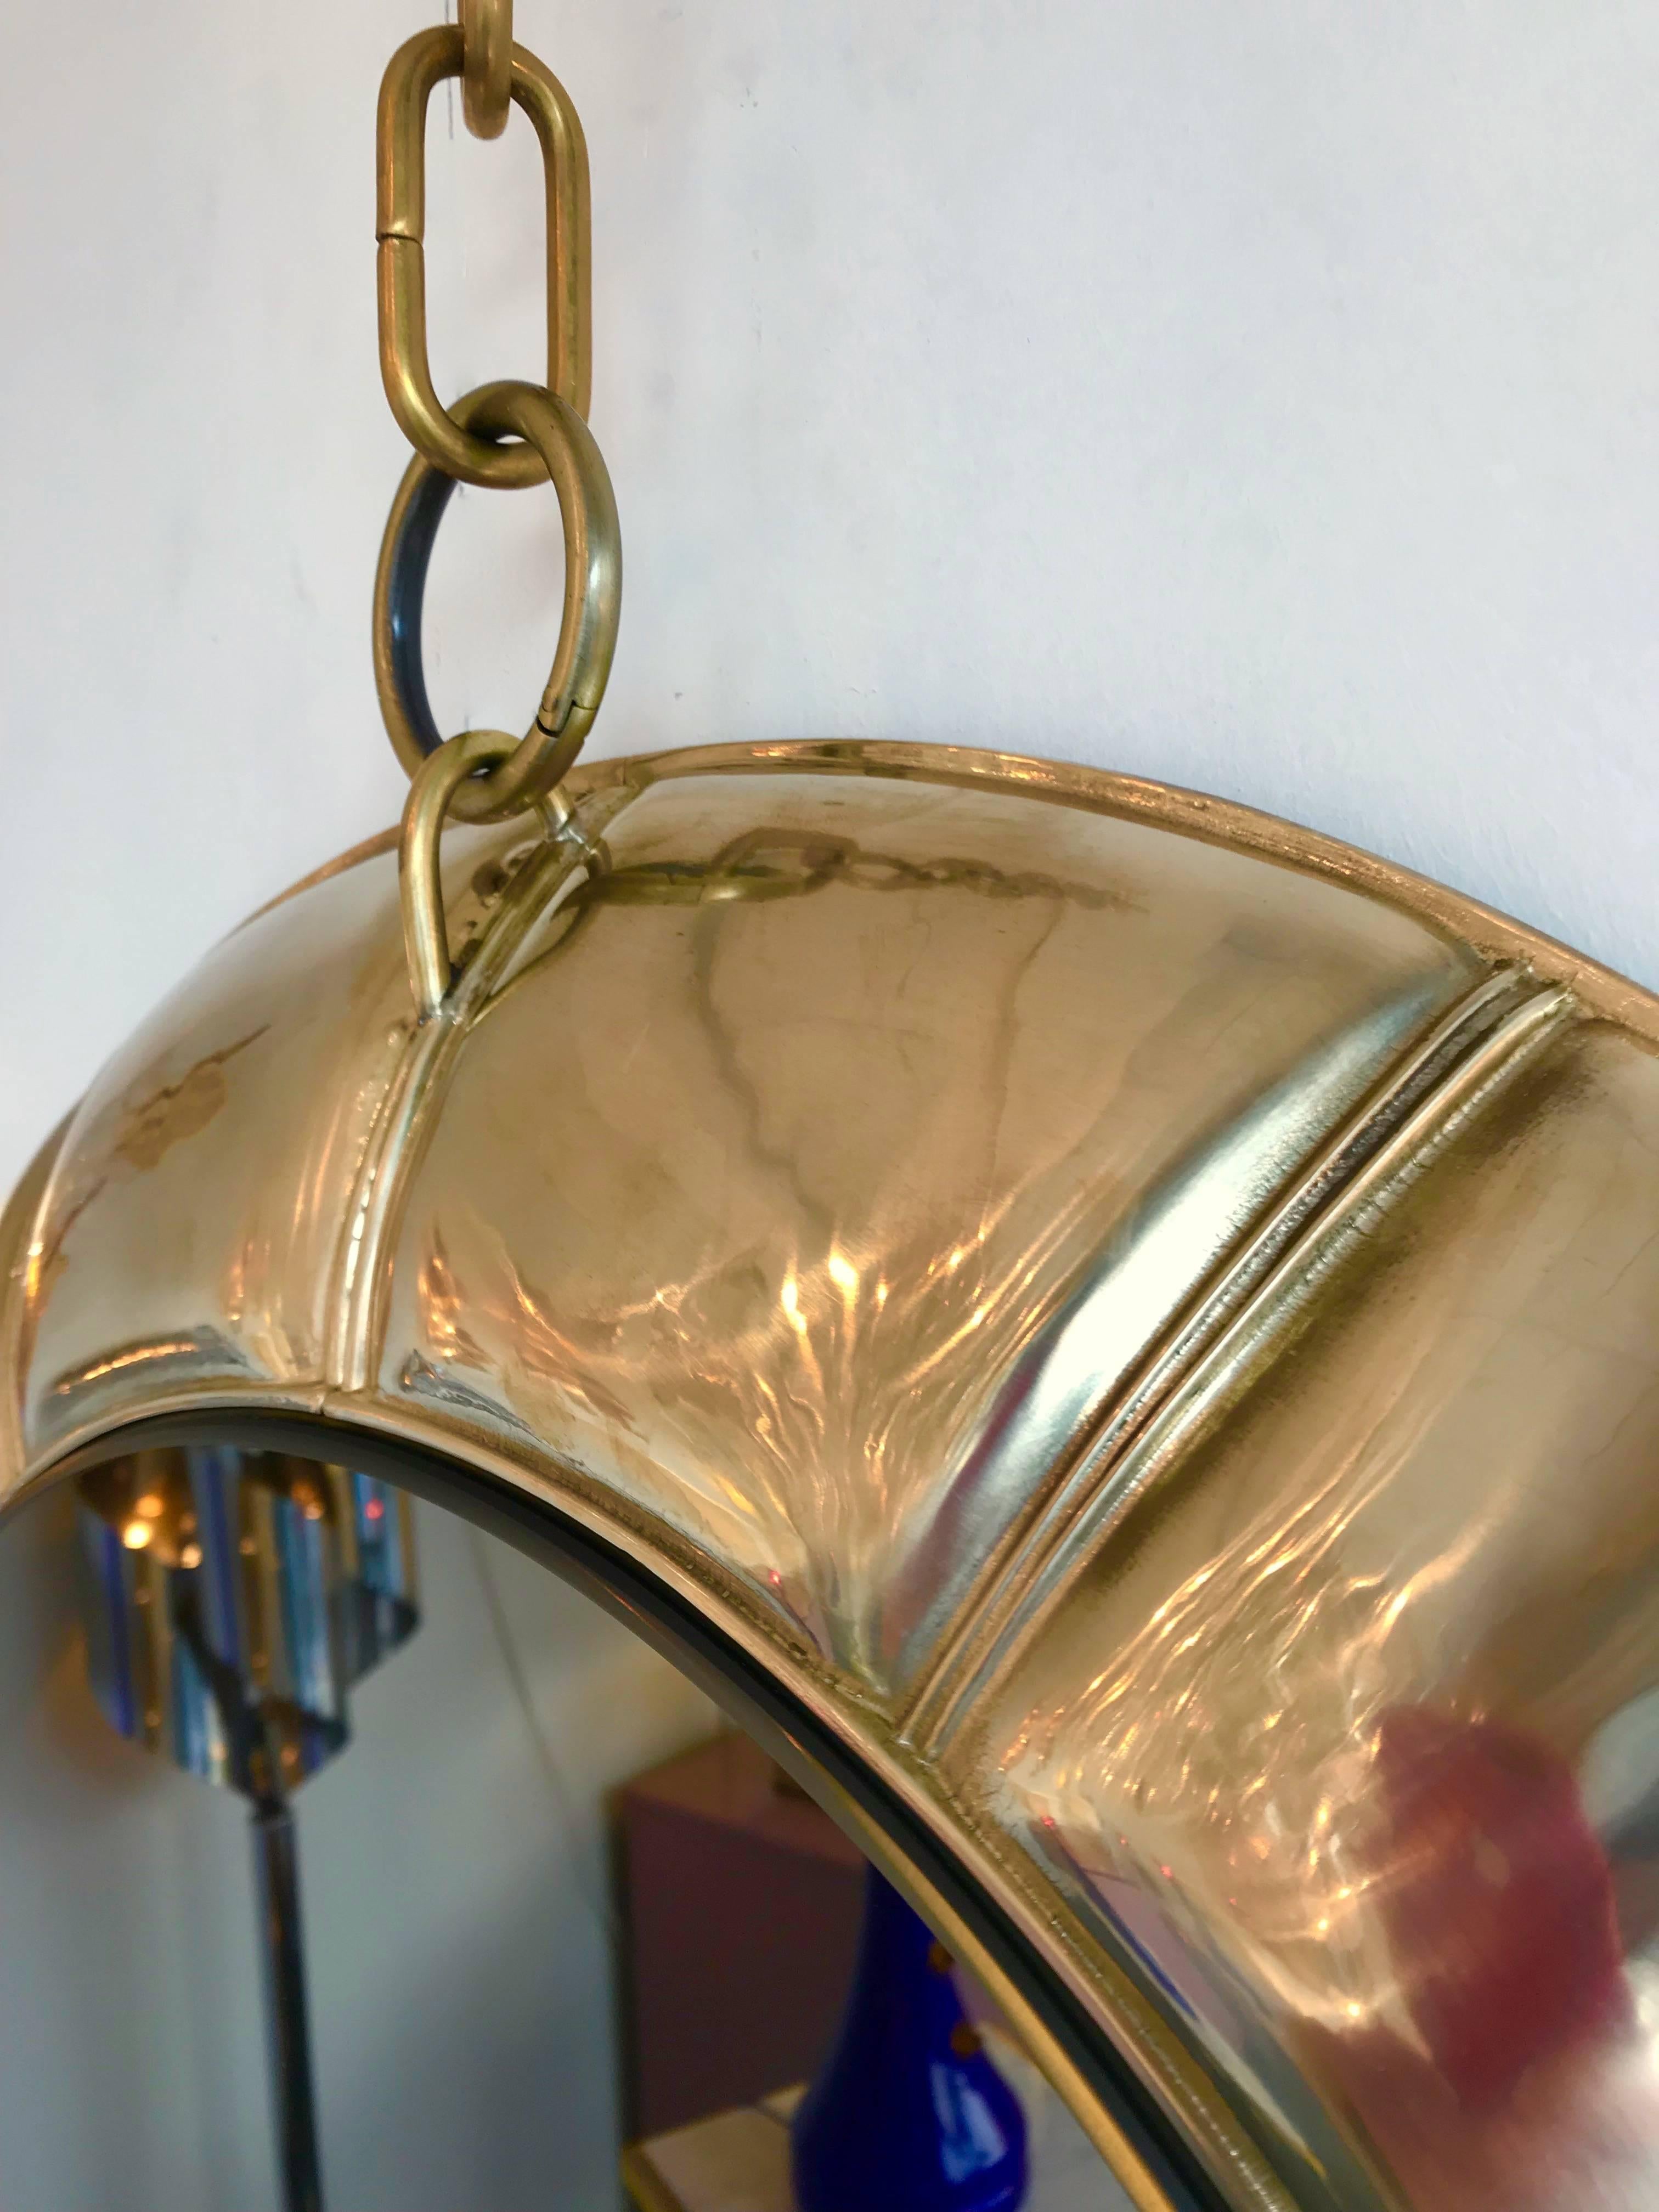 Mirror brass hanging by chain. Limited edition of 10 exemplary.